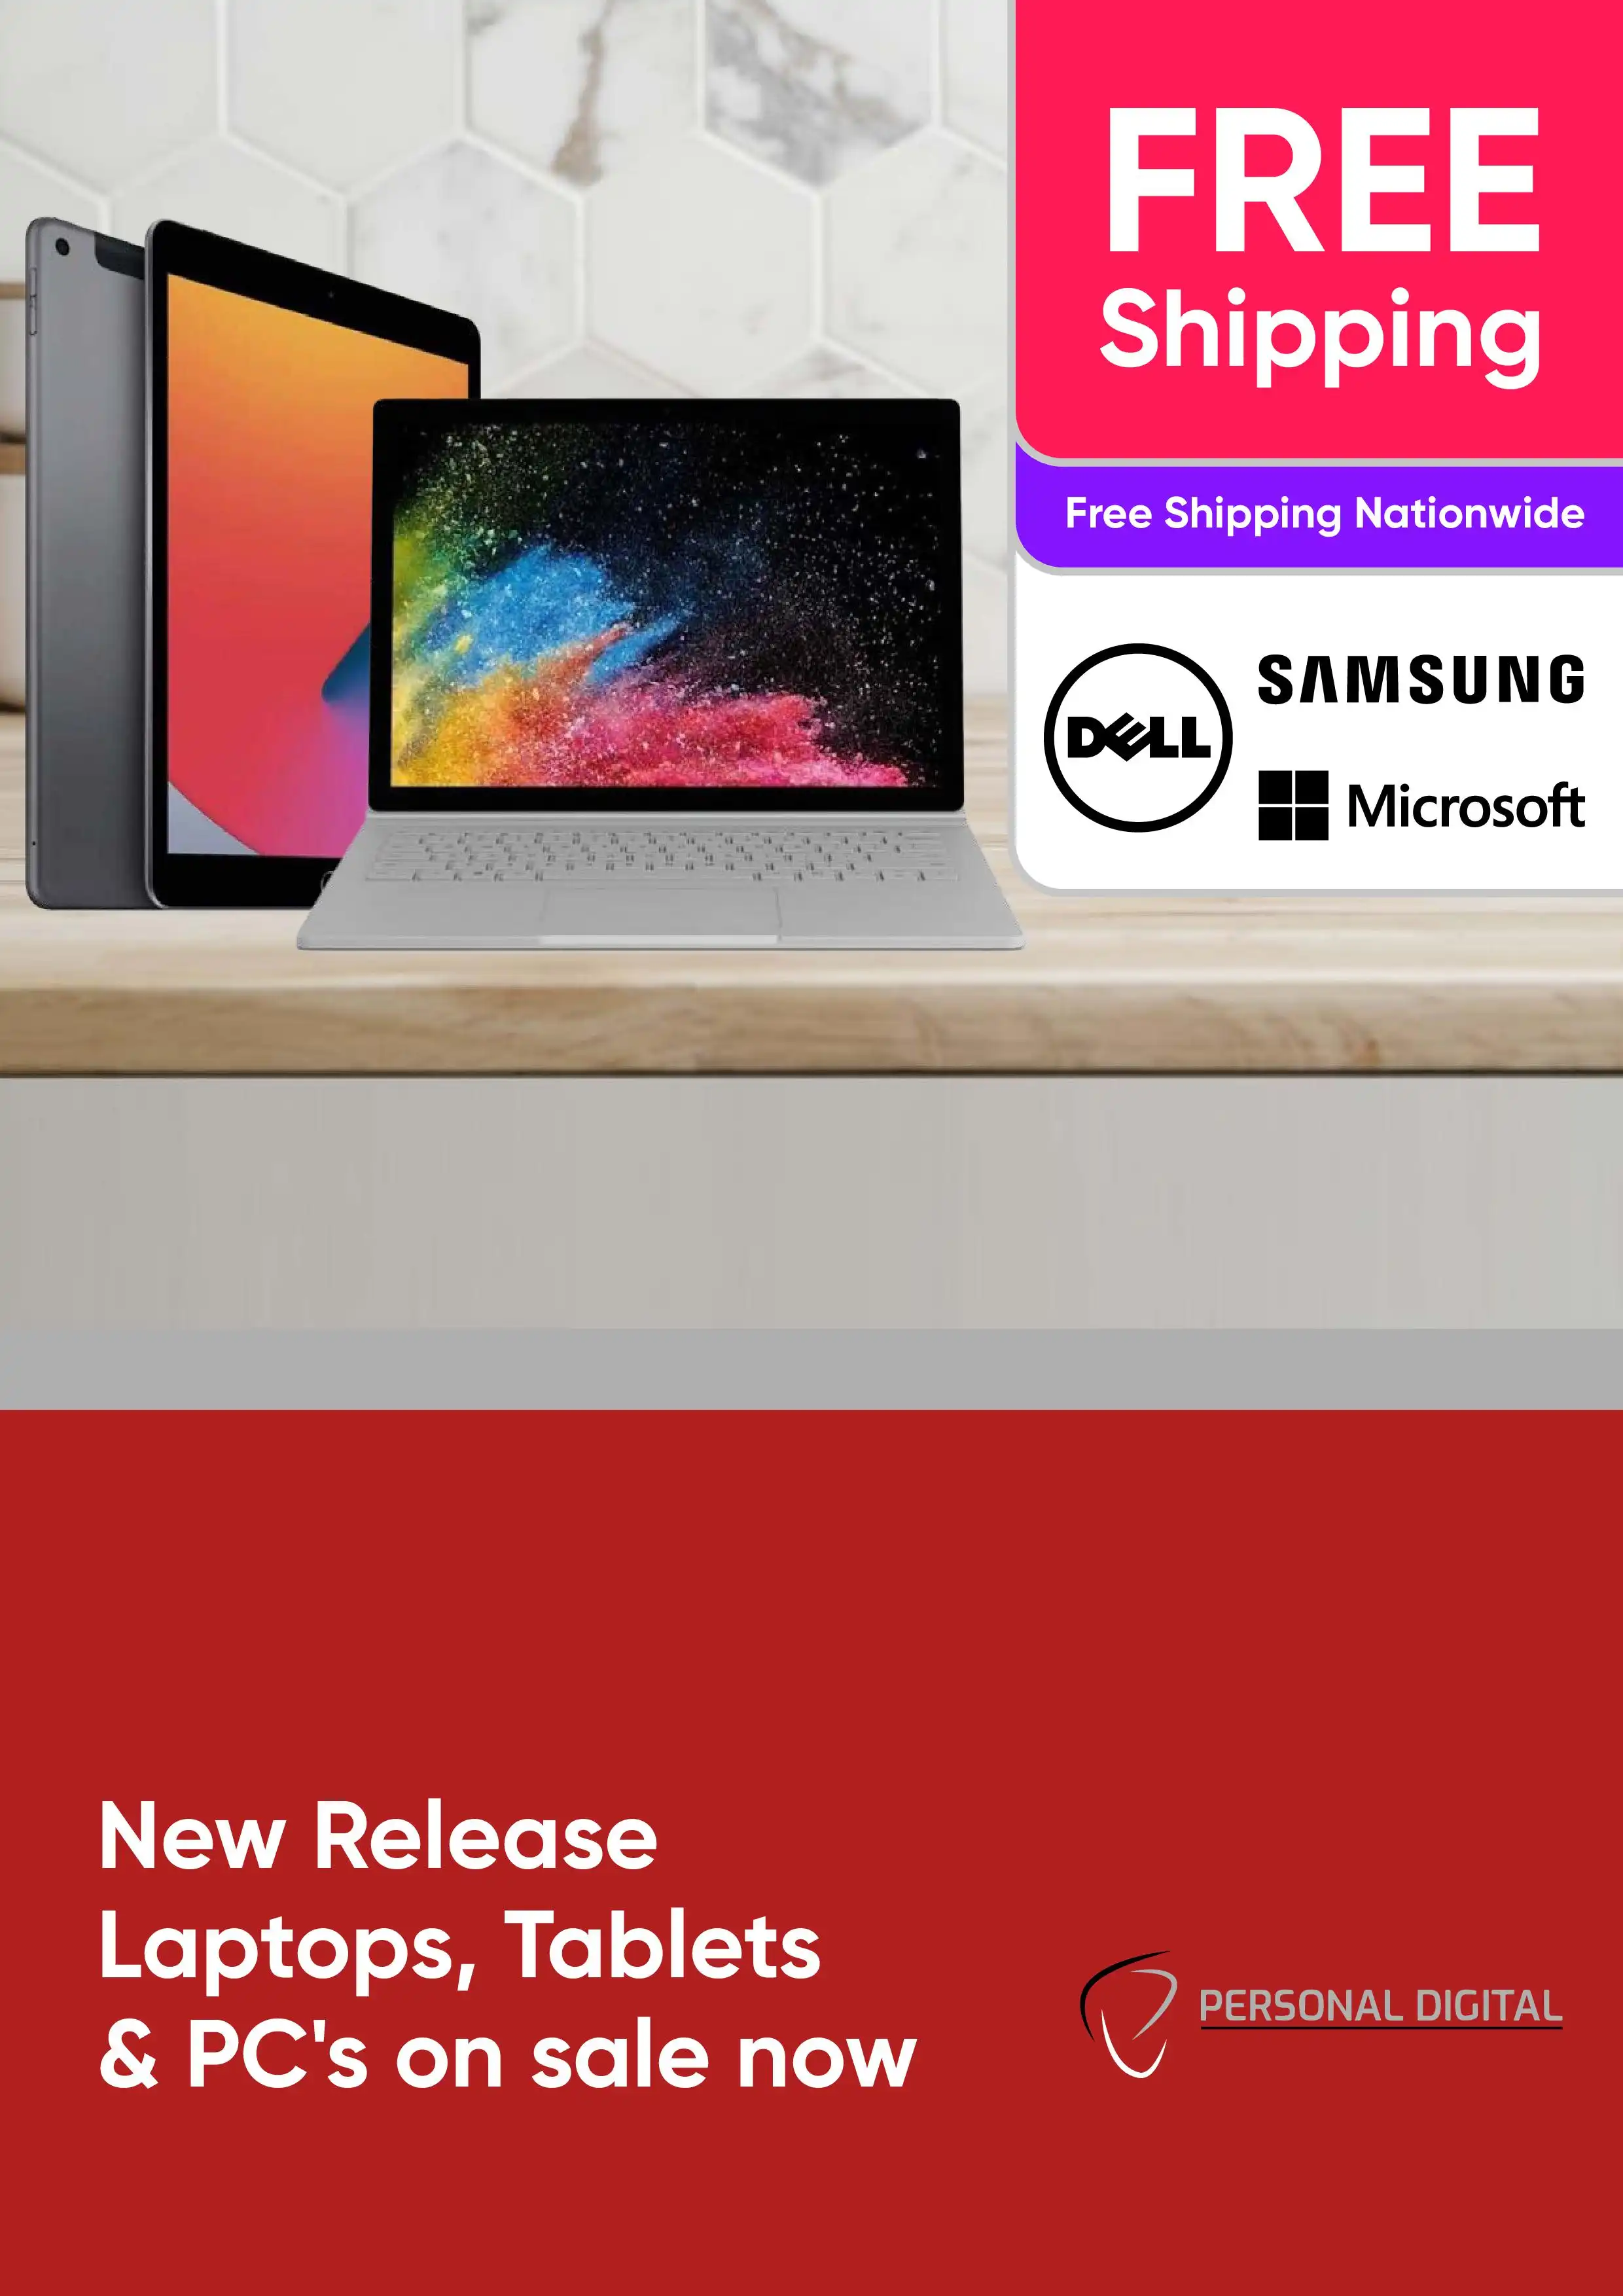 New Release Laptops, Tablets & PC's on sale now